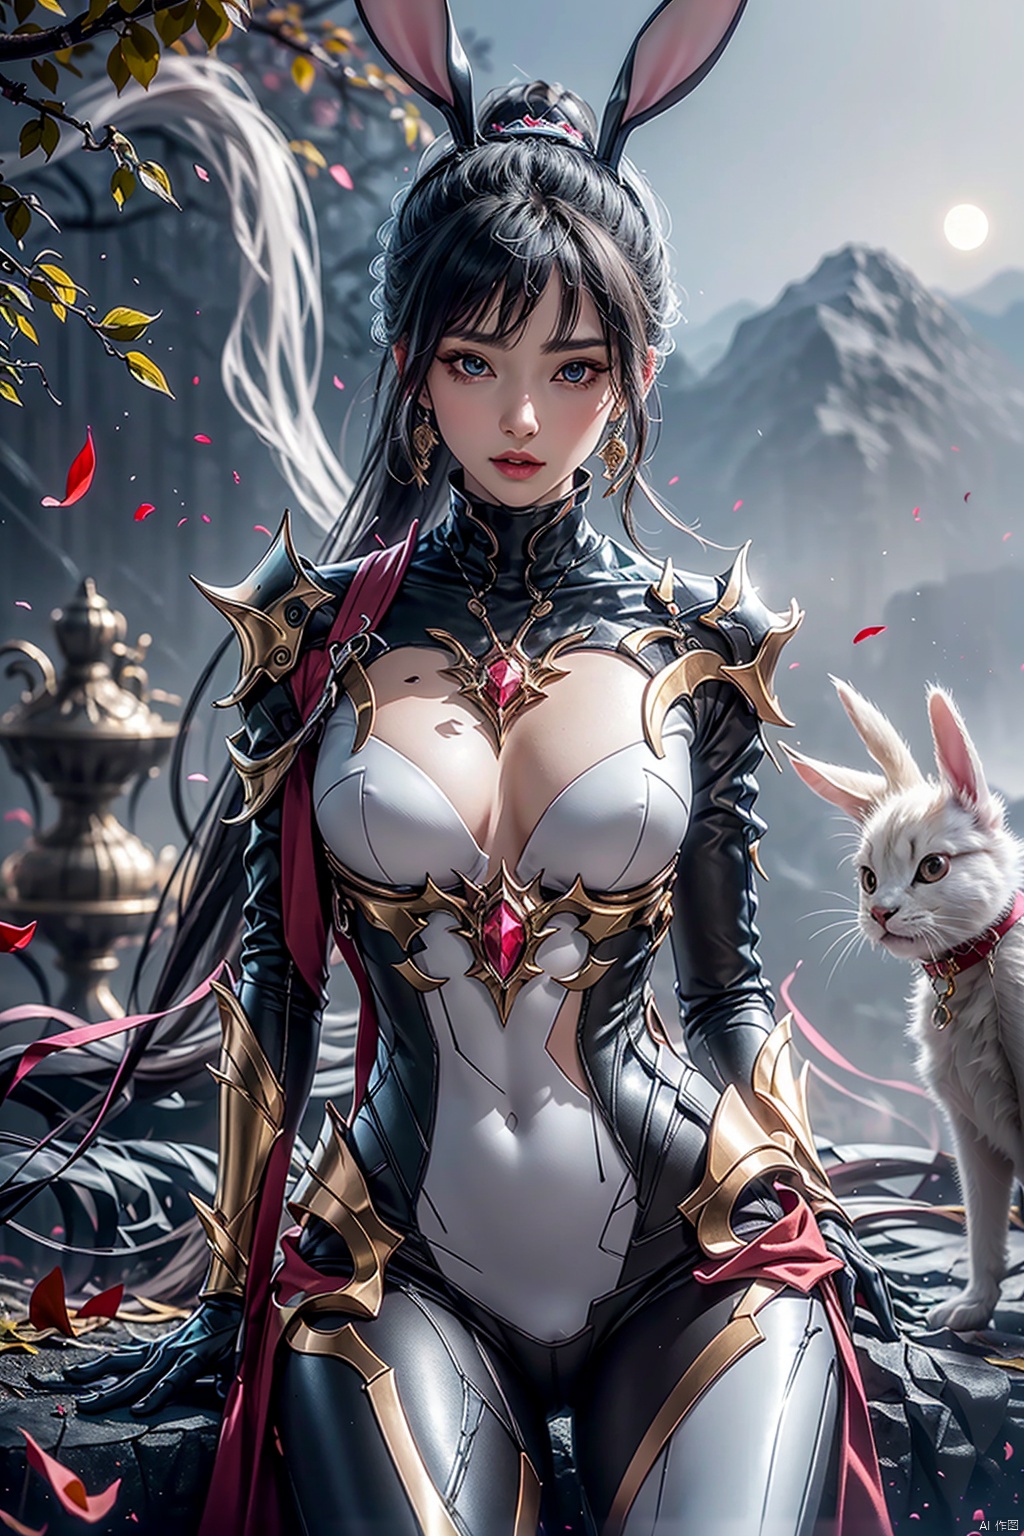  （Xiaowu has a pair of white rabbit ears.） Xiao Wu,A pair of lovely white rabbits. In an ancient city., china dressPrompt: Xiao Wu, In an ancient city.,Close ,（Xiao WuRabbit ear 1.3）,shot,8k,1girl,dress,thighhighs,bare shoulders,lo style chinesedress,bouquet,rose,jewelry,earrings,holdingflower,gloves,elbowgloves,vase,underwear,panties,cleavage,,garterstraps,Scorpion braid, high ponytail, long hair, bridal updo. White and moving, smart eyes, beautiful and delicate. She is petite, well-proportioned, tall and quaint.The ancient city is surrounded by mountains and rivers,The weeping willows on the shore,The moonlight is as quiet as water. The autumn wind sweeps away the yellow leaves.Vision 1.3,Cute Rabbit Ears,Graceful Curve,Negative prompt: EasyNegative,Steps: 20,Sampler: Euler a,CFG scale: 7,Seed: 0,Size: 512x768,VAE: Automatic,Denoising strength: 0.5,Clip skip: 2,Model: jimengv2,LoRA: 4bc654f7-d2b9-4438-b02c-b523472a38a1.by_tusi,317aae22-a282-43d1-b1ff-20c9c3305aa3.by_tusi,Hires resize: 1024x1536,Hires steps: 20,Hires upscaler: R-ESRGAN 4x+,(Two rabbit ears), china dress, chinese dress, xiaowu